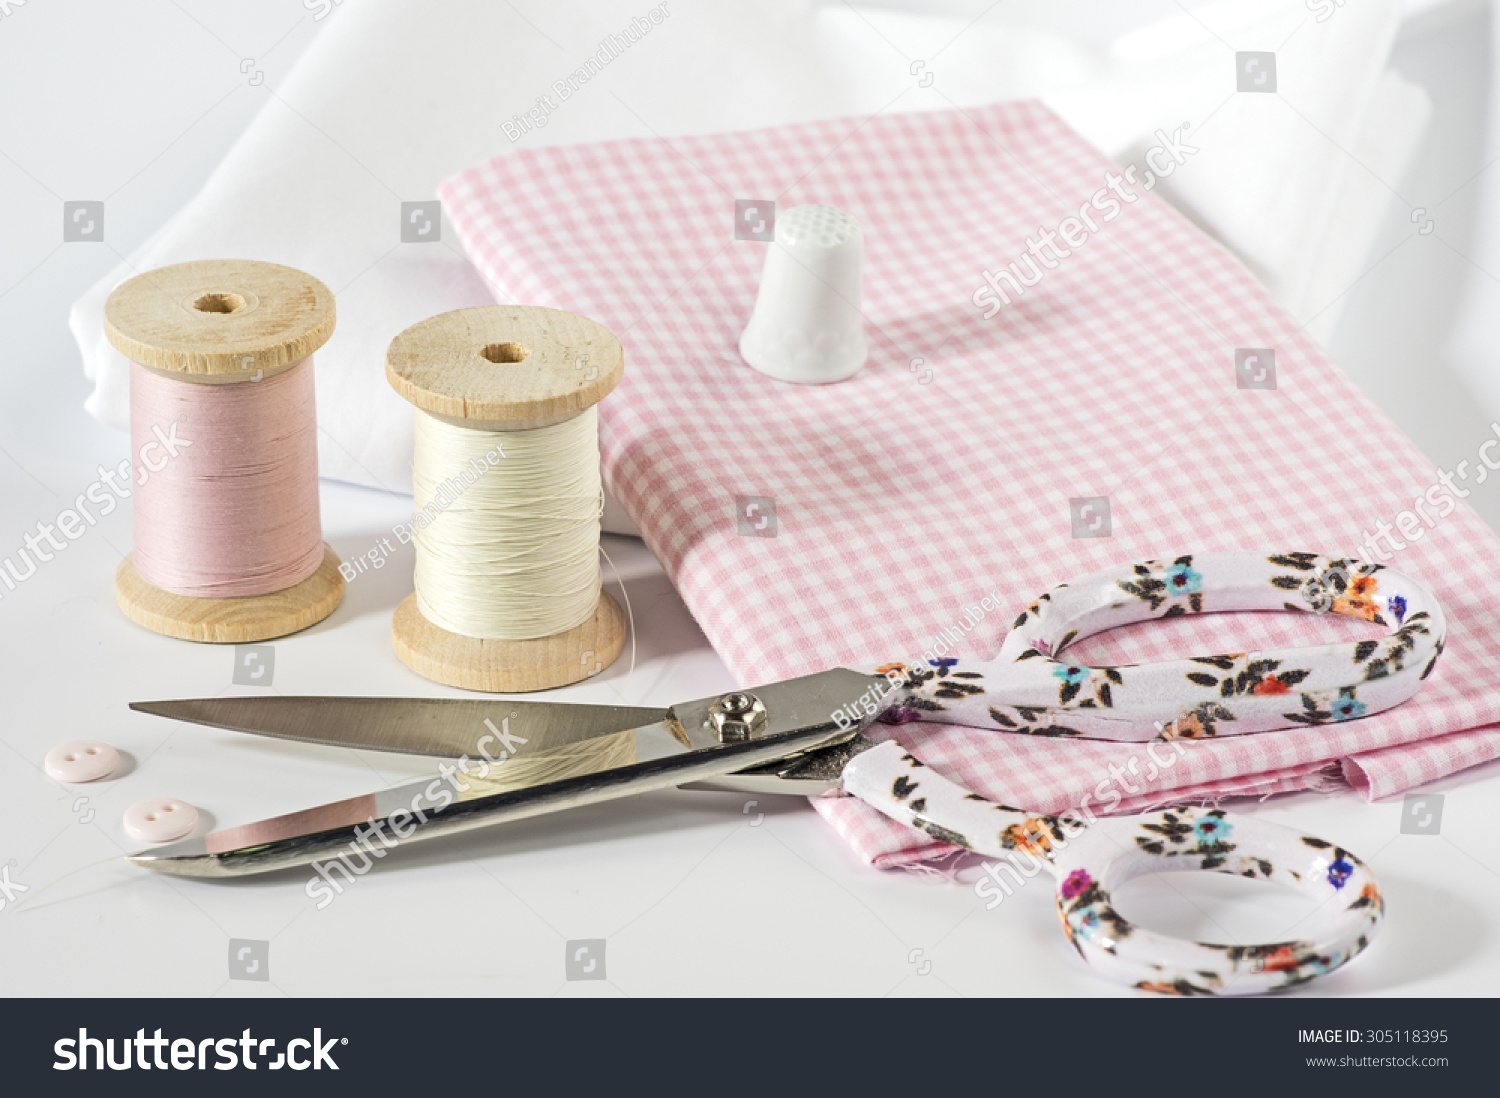 Fabric and sewing tools in pink #305118395